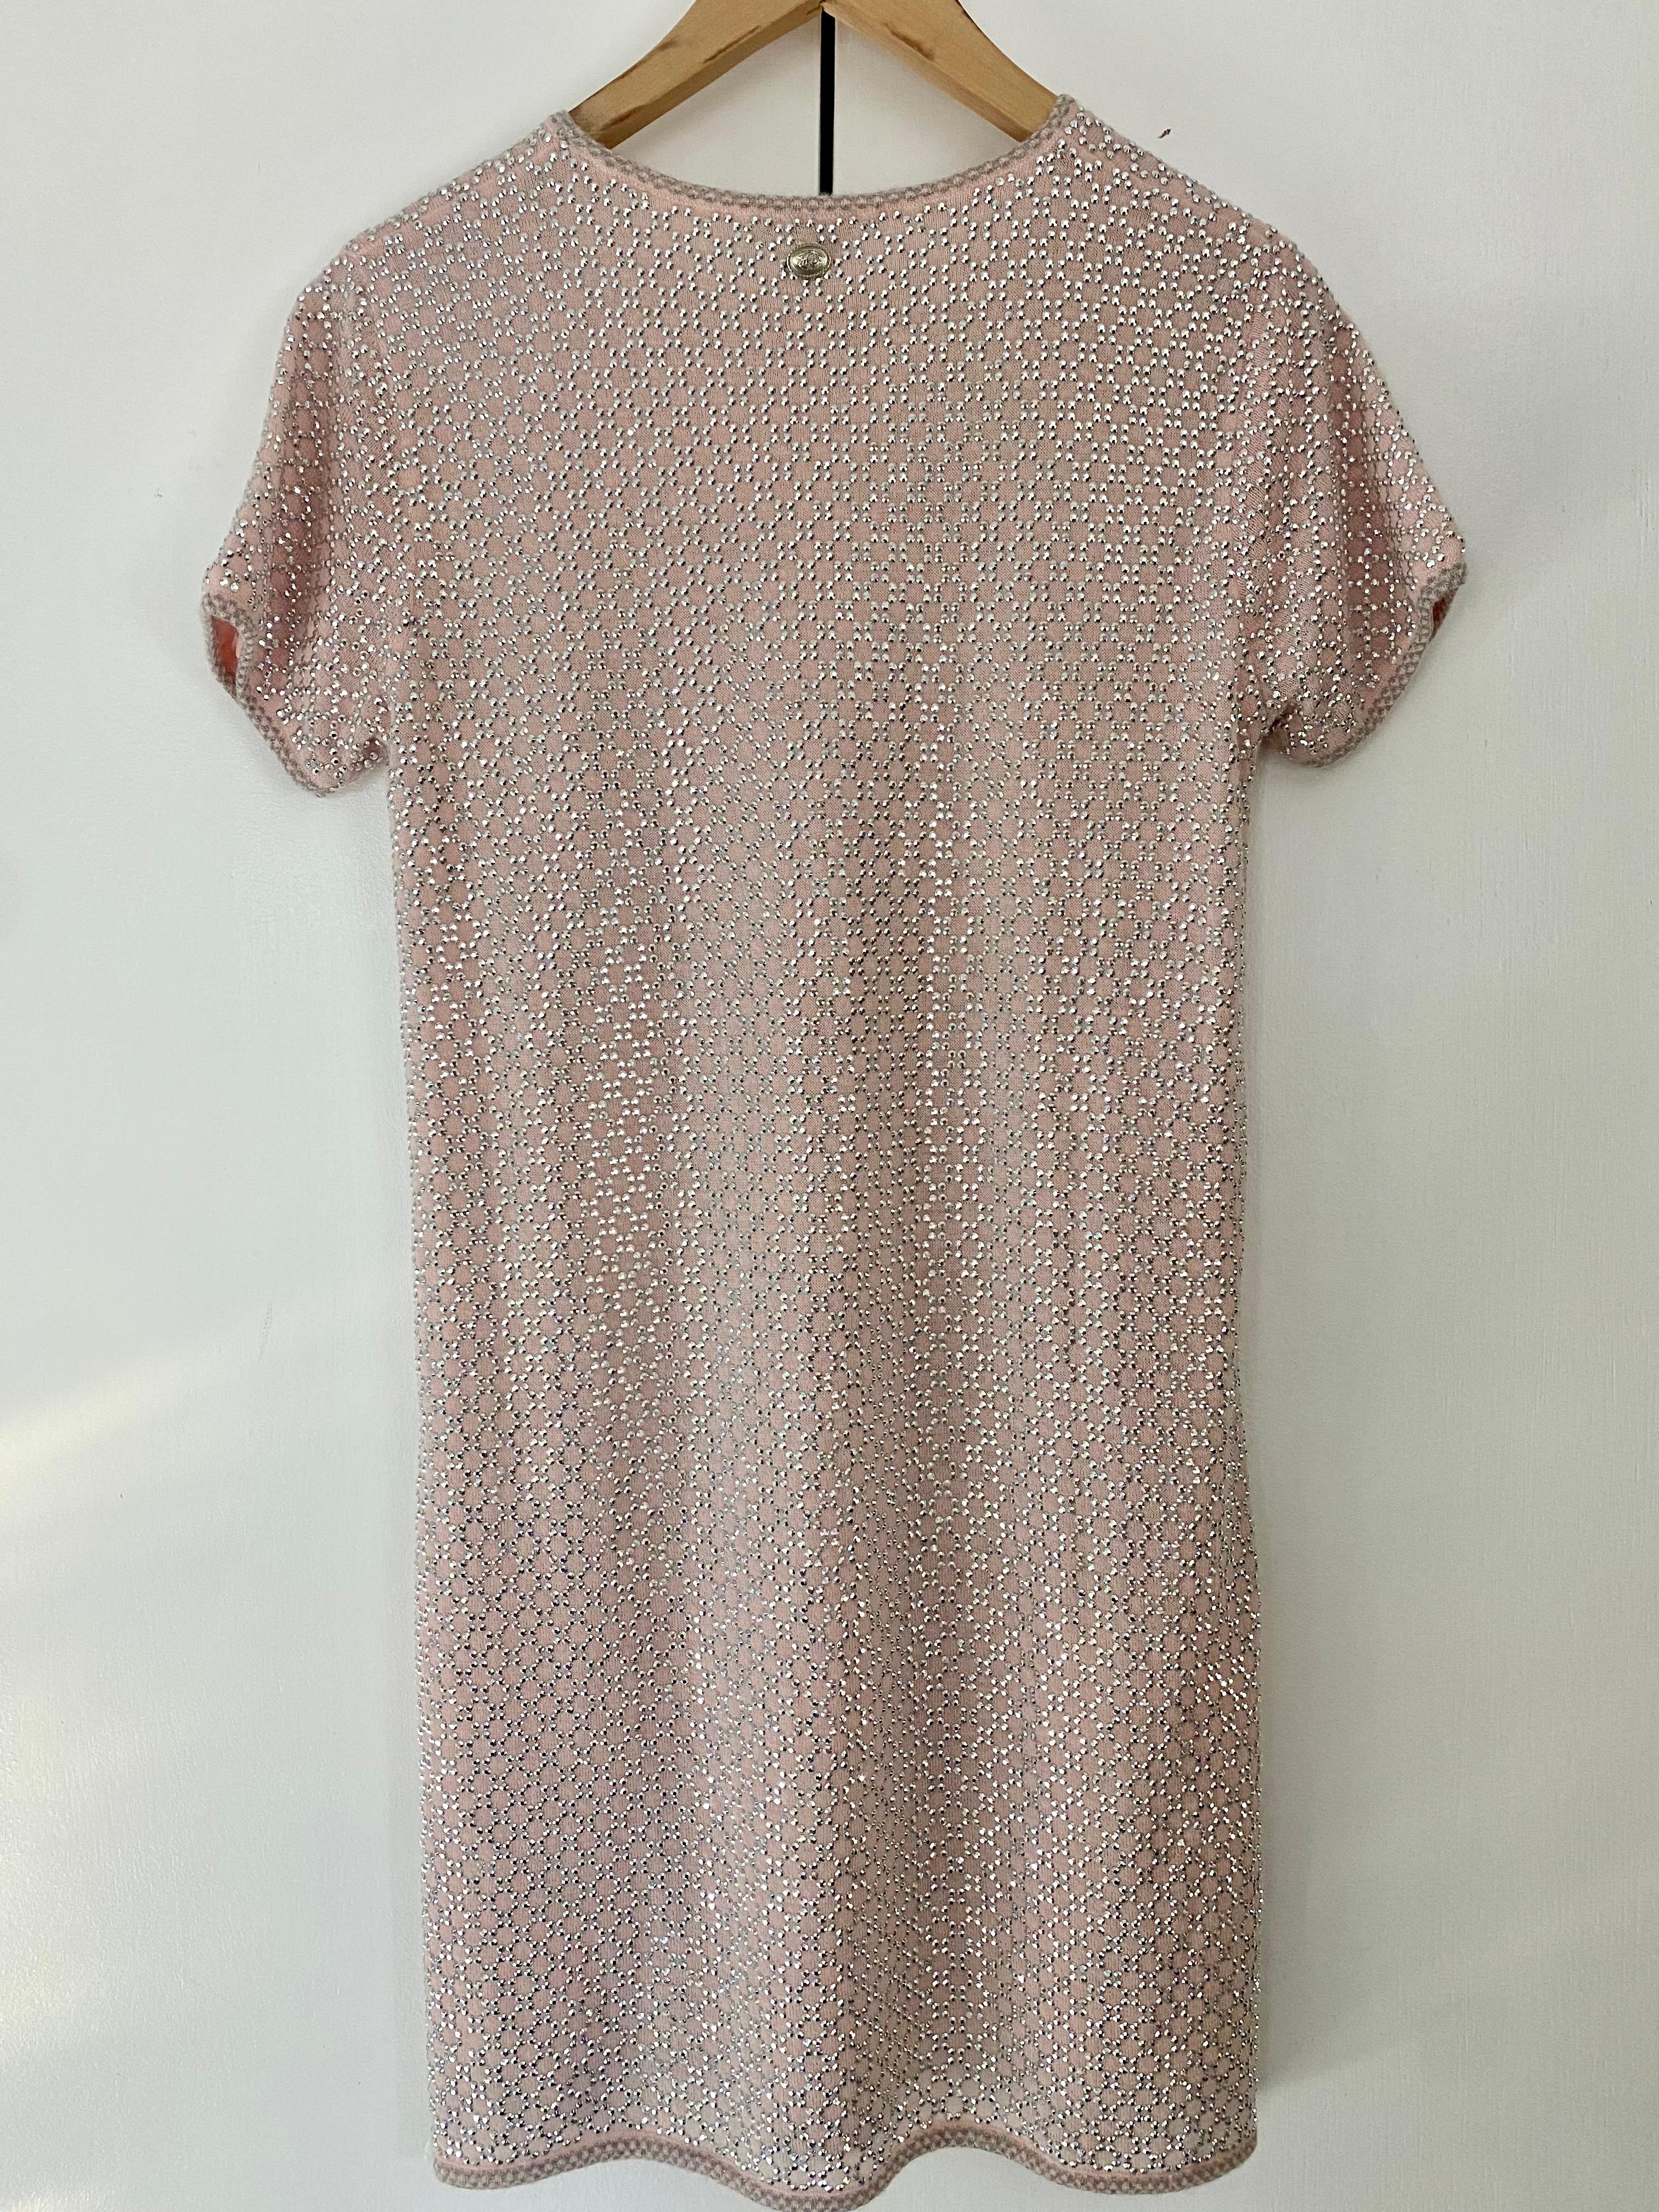 New Chanel Baby Pink Silver Studded Embellished Dress Size 38 For Sale 6